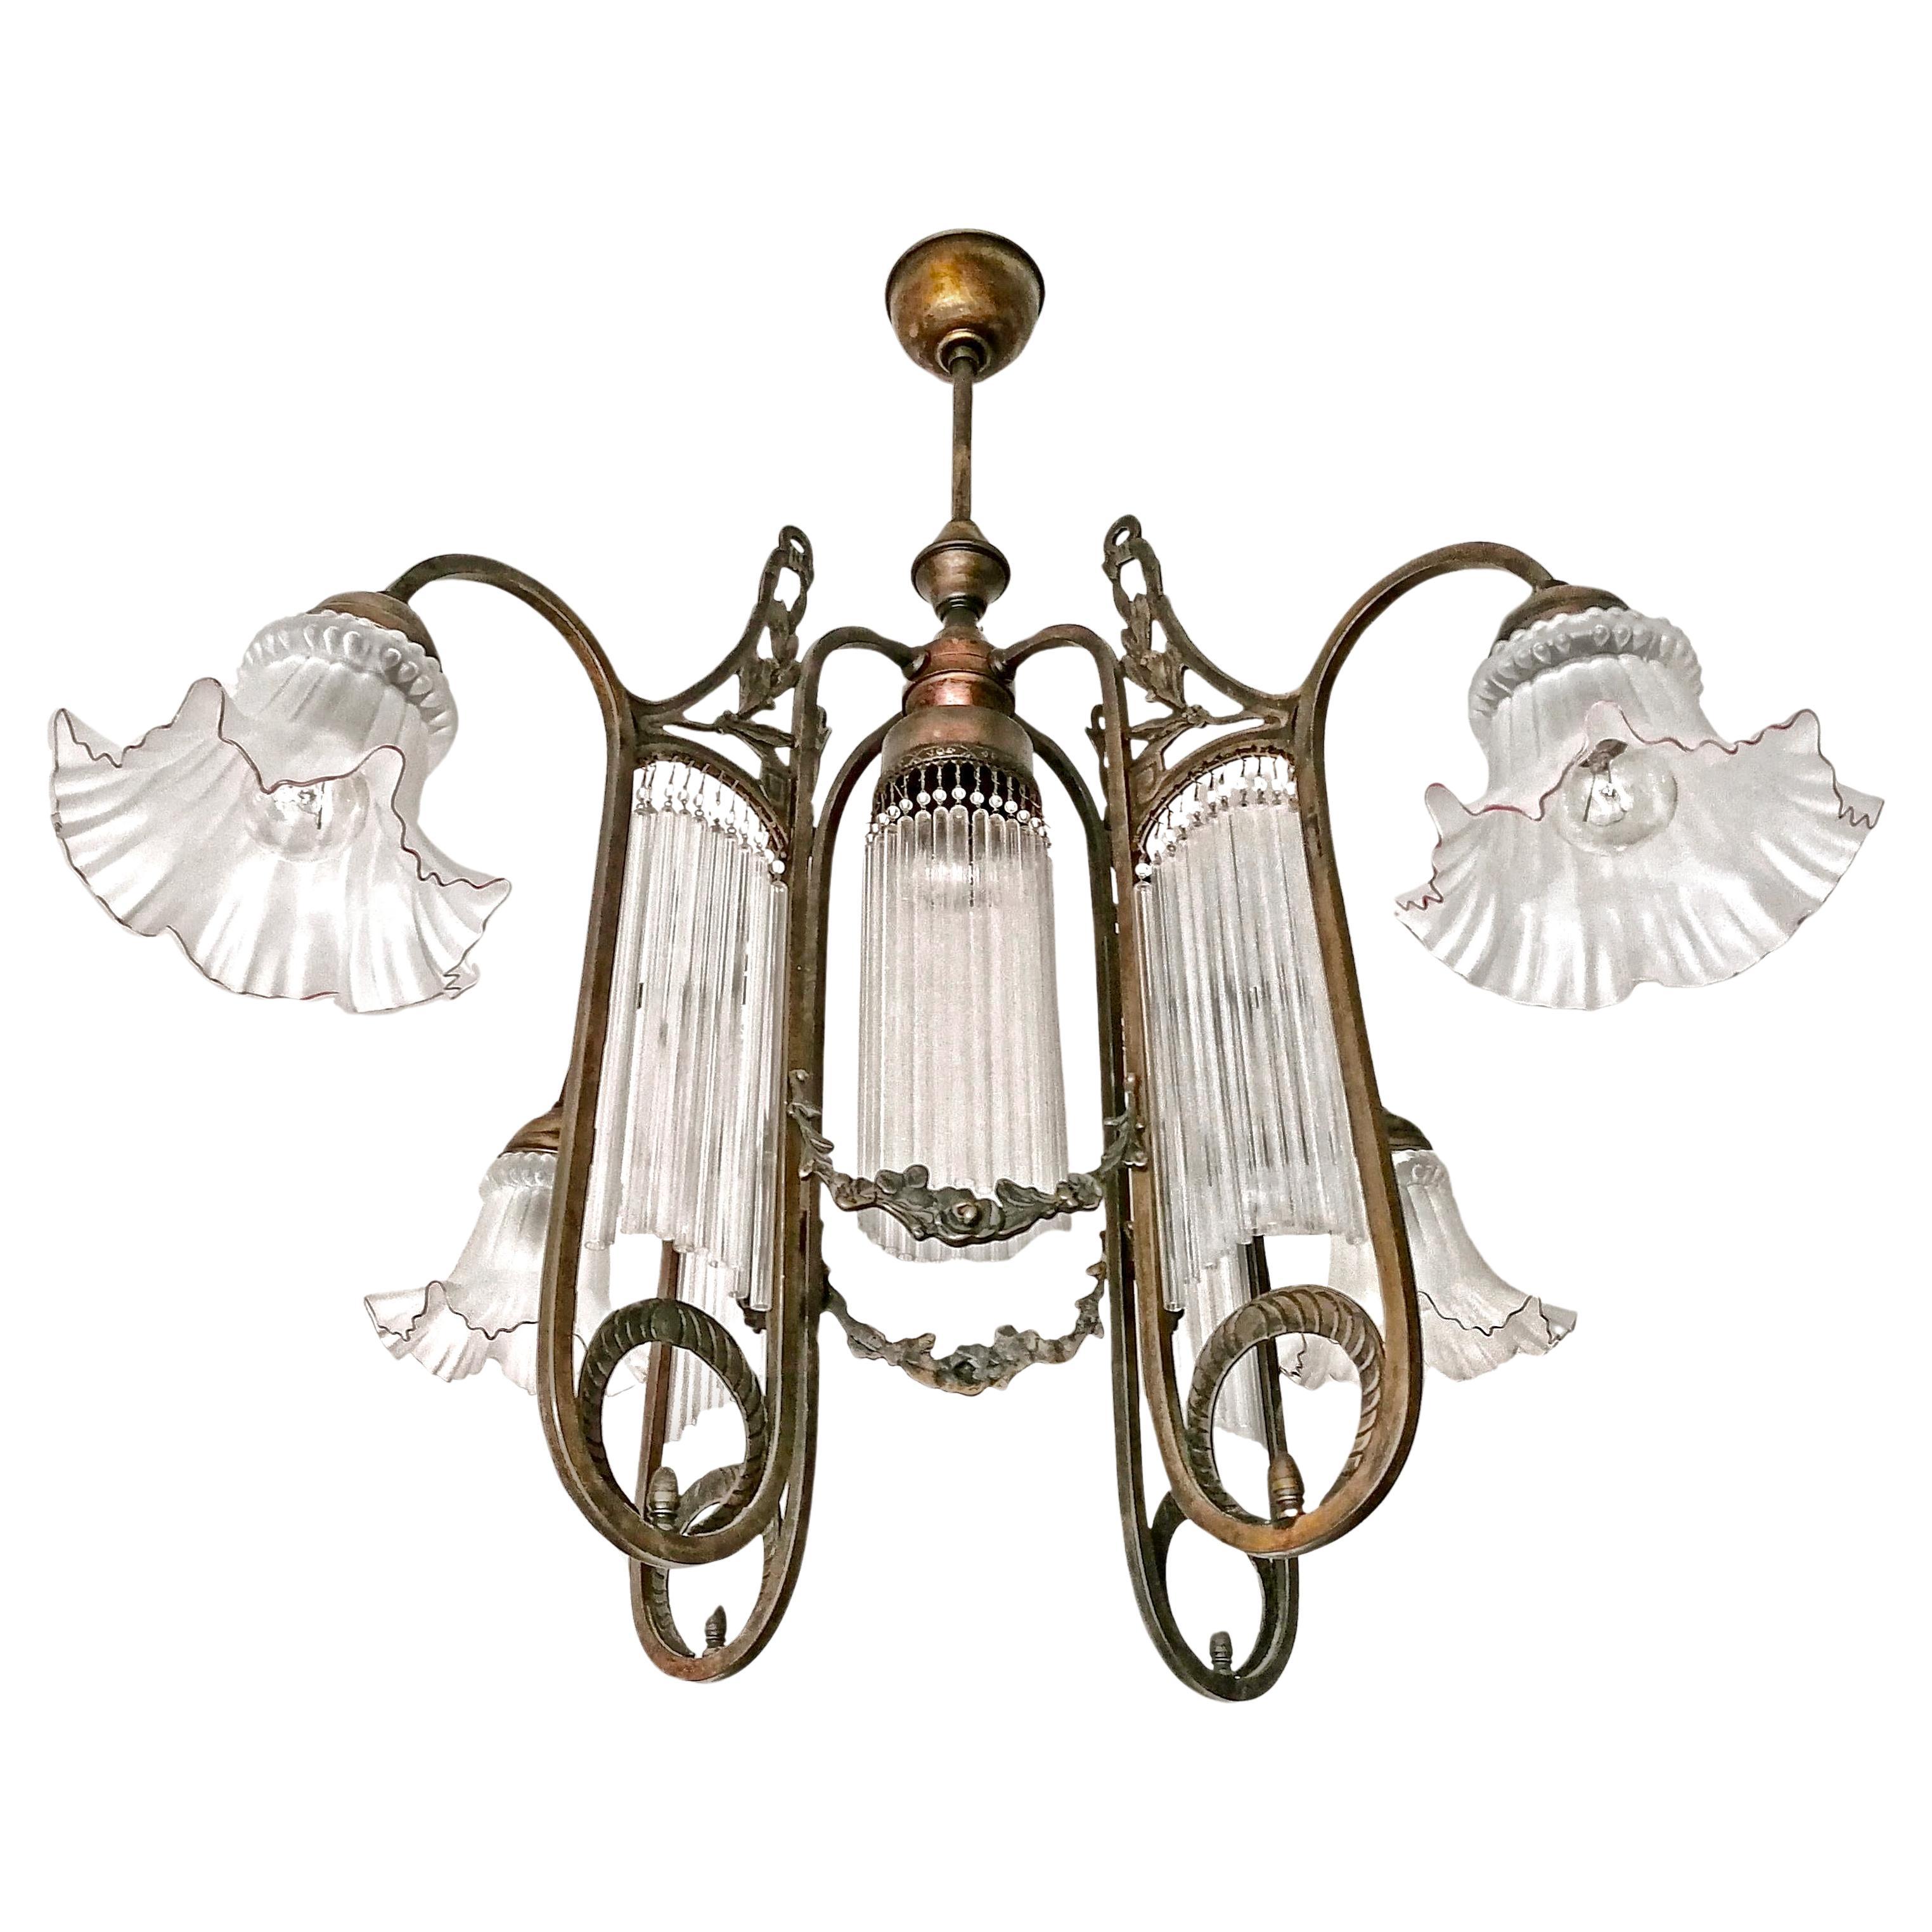 Gorgeous French Art Nouveau Art Deco Chandelier with Garlands and Beaded Glass Straw Fringes in Burnished Brass with four frosted satin art glass lamp shades with purple trim and five light bulbs.

Dimensions: 
Height 33.47 in / 85 cm
Diameter 33.47